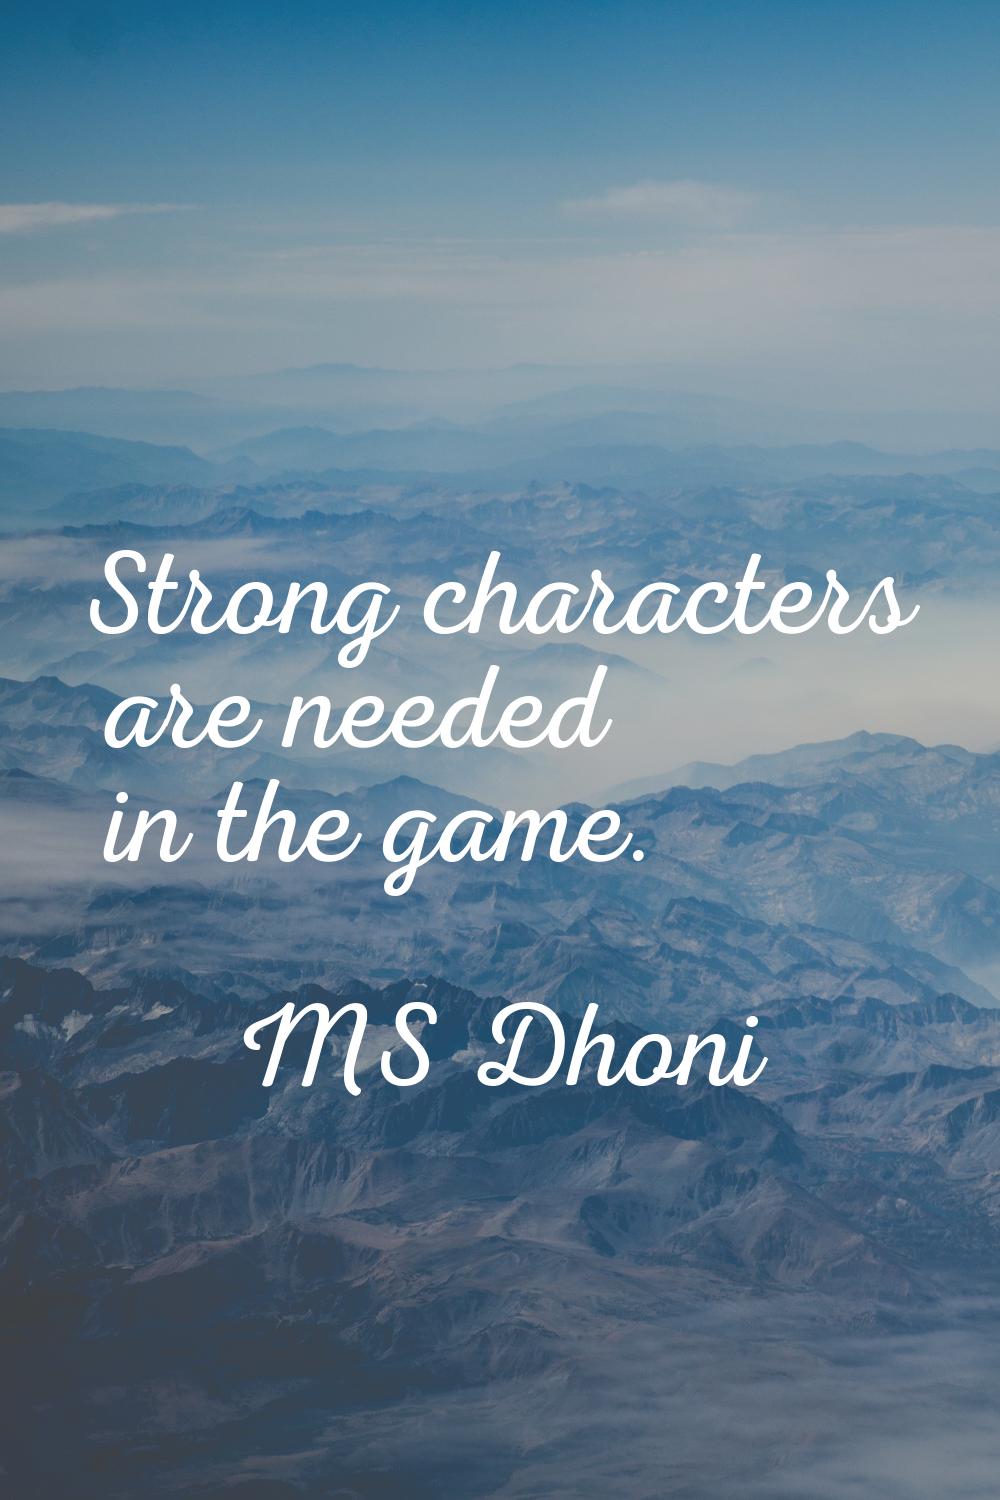 Strong characters are needed in the game.